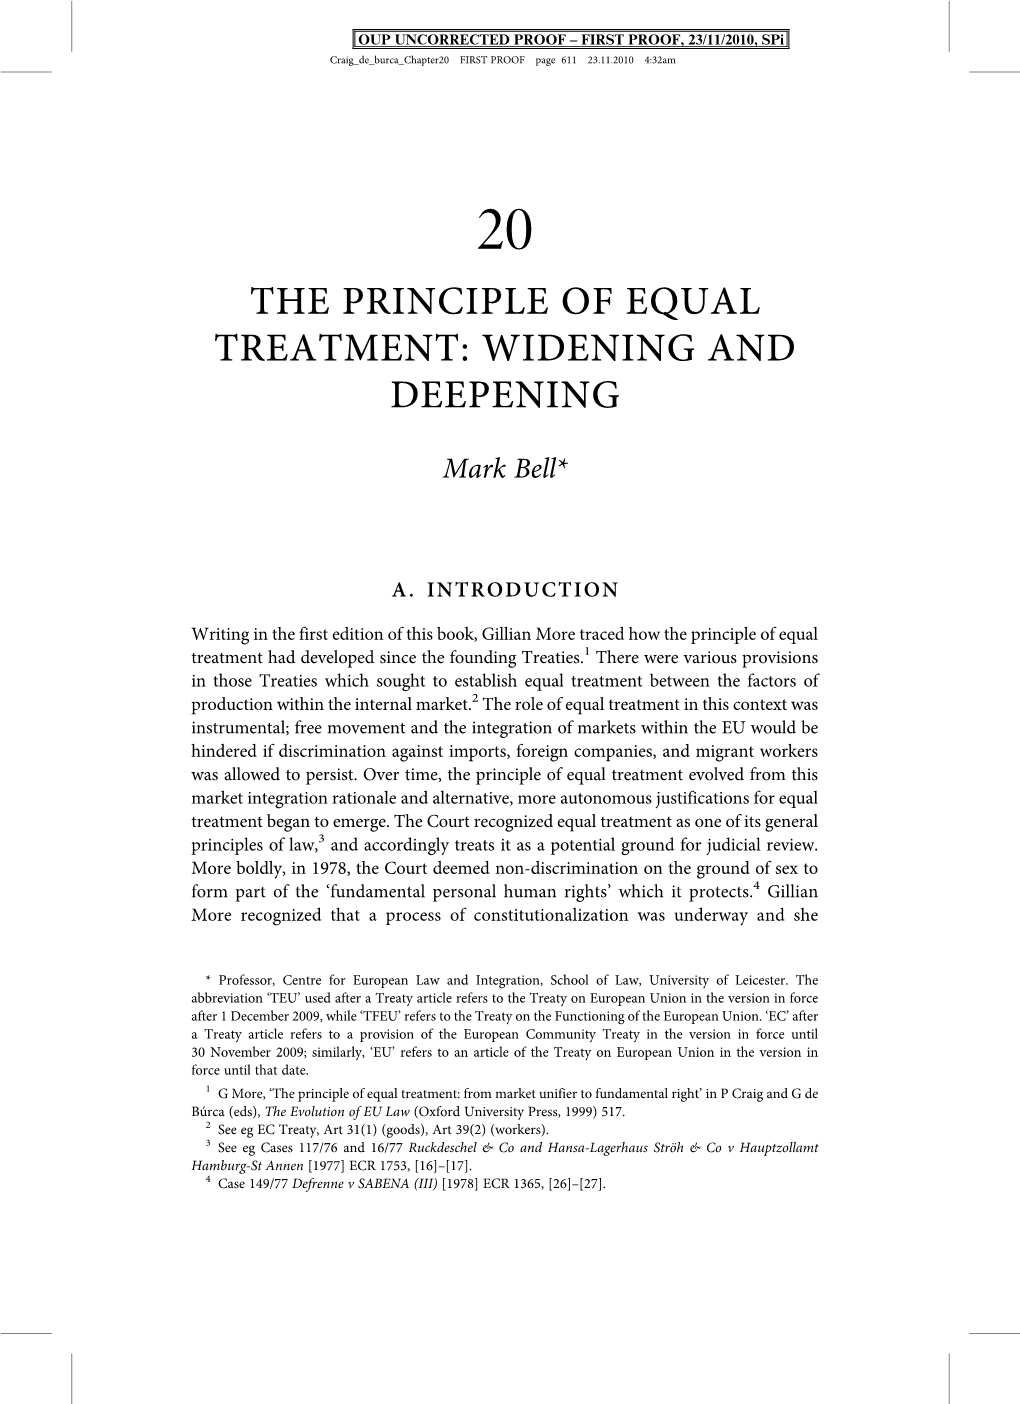 The Principle of Equal Treatment: Widening and Deepening